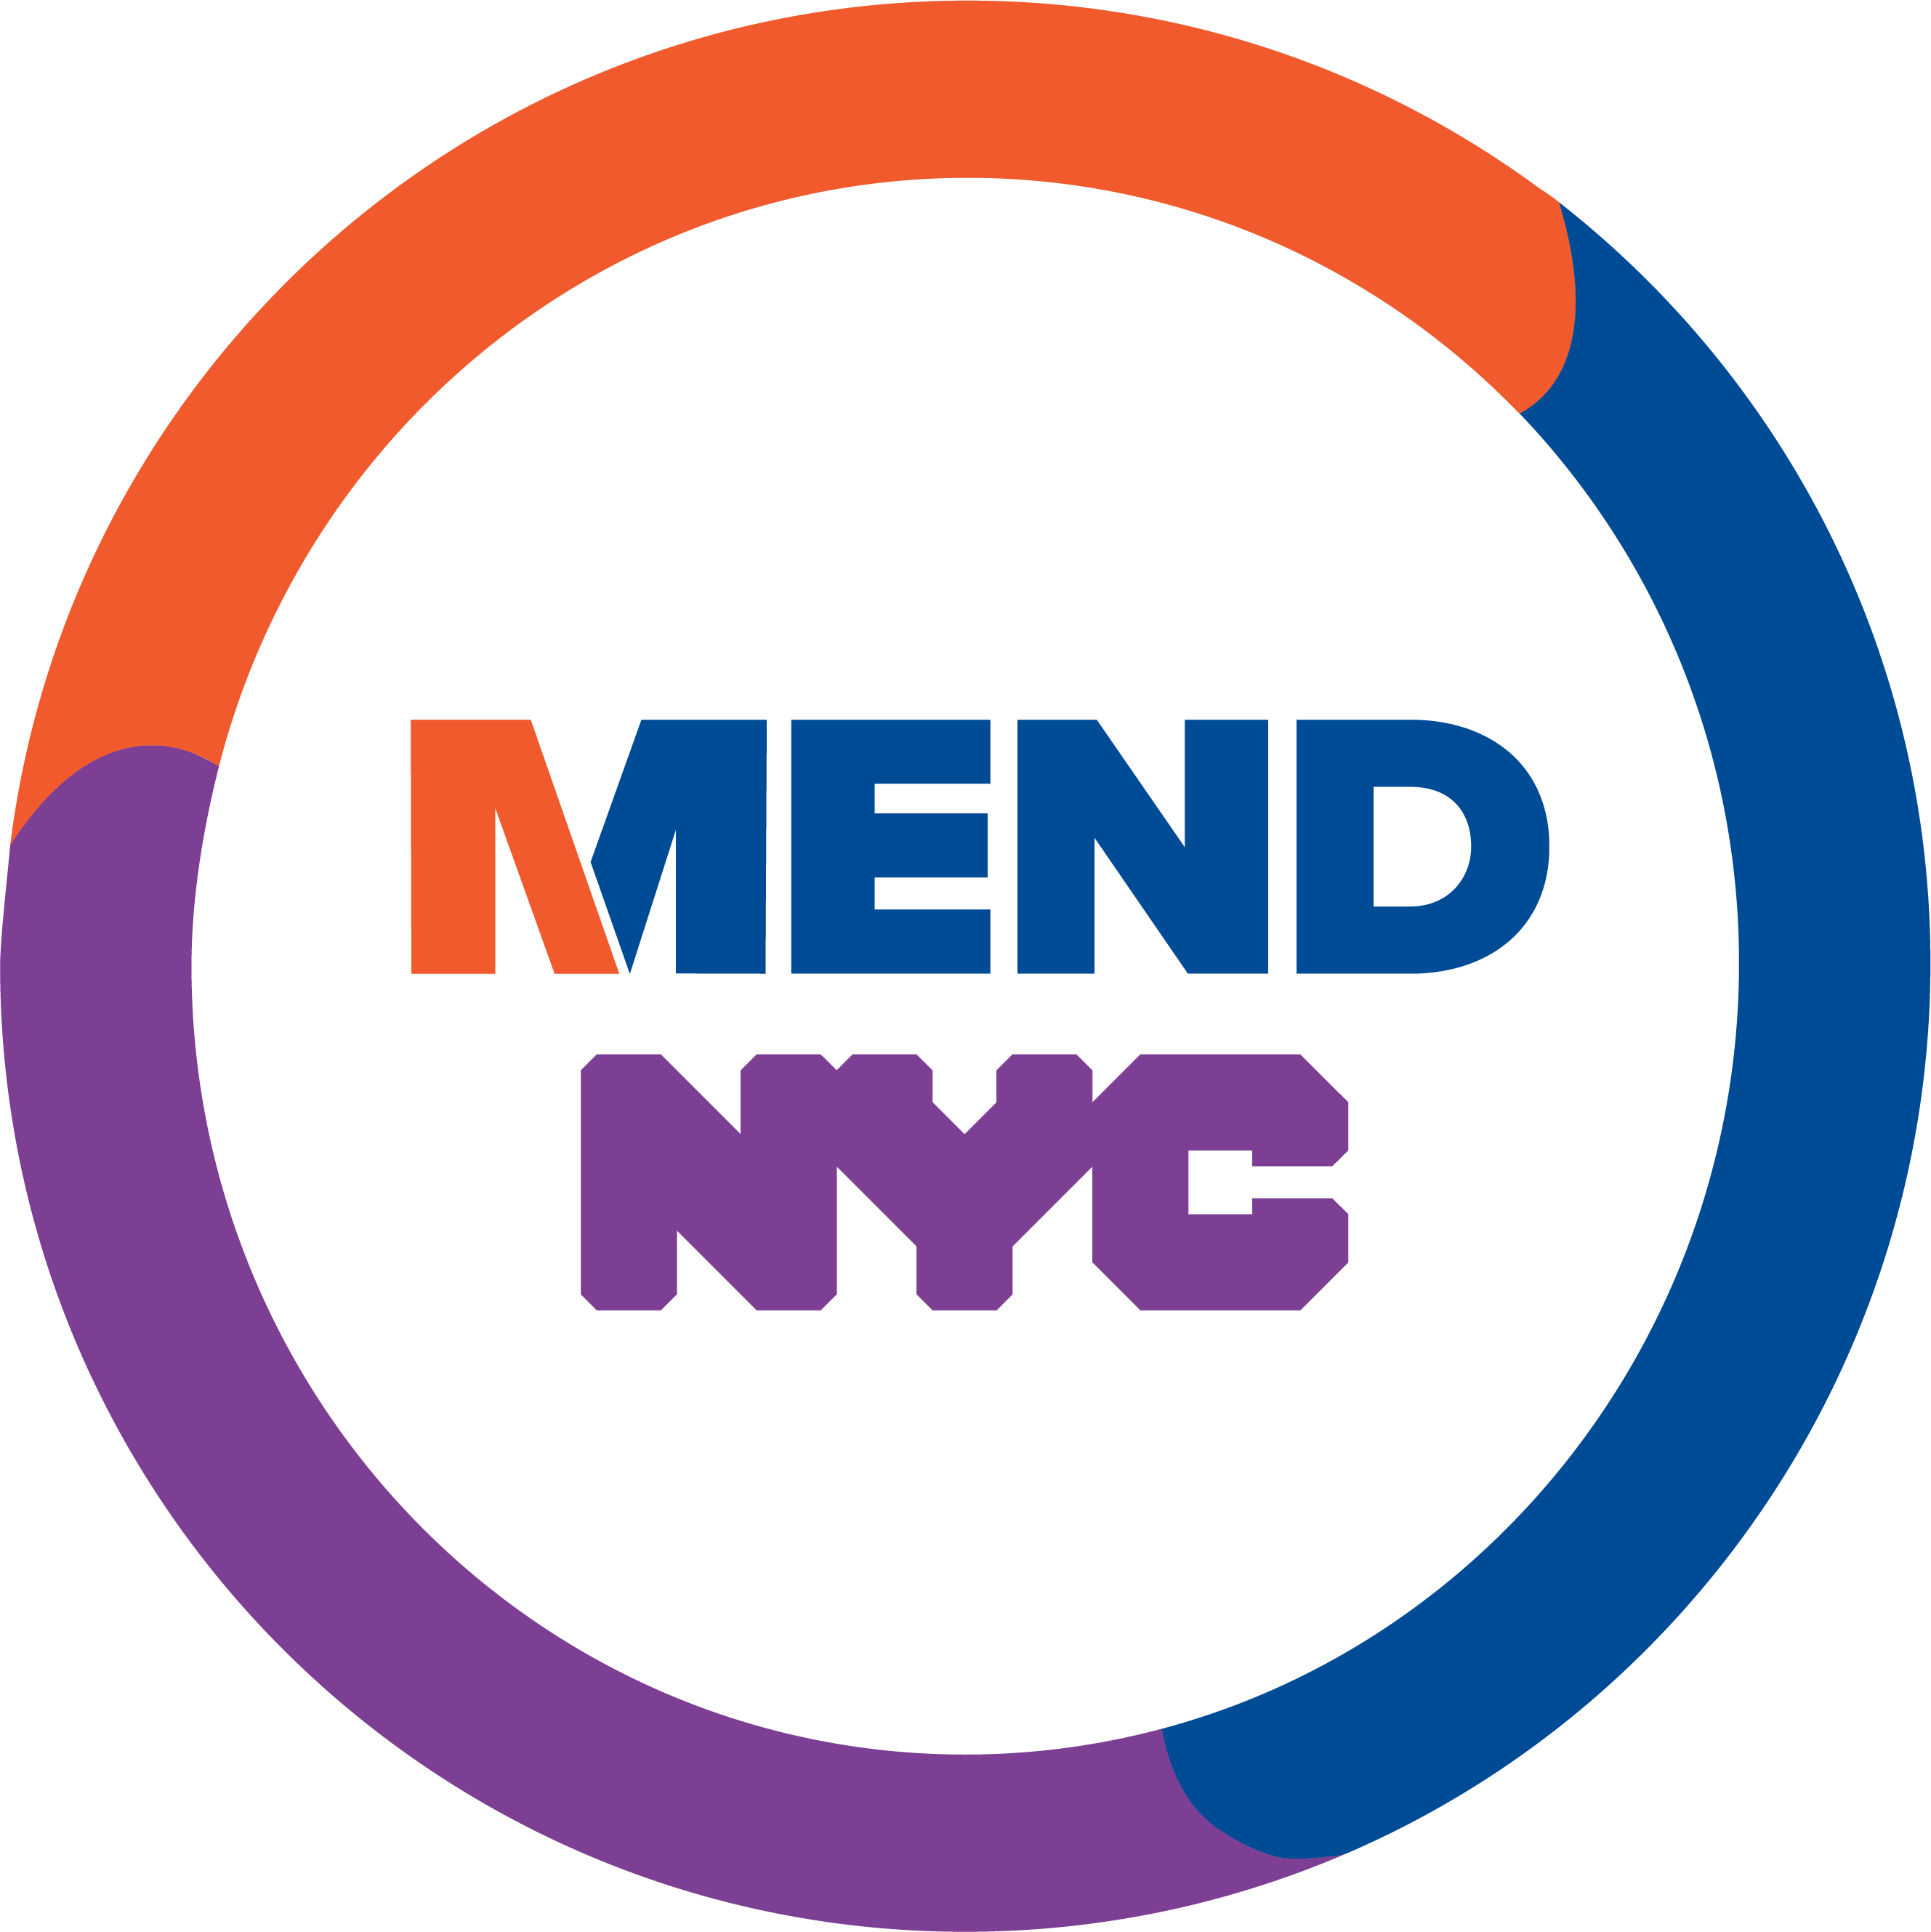 MEND NYC